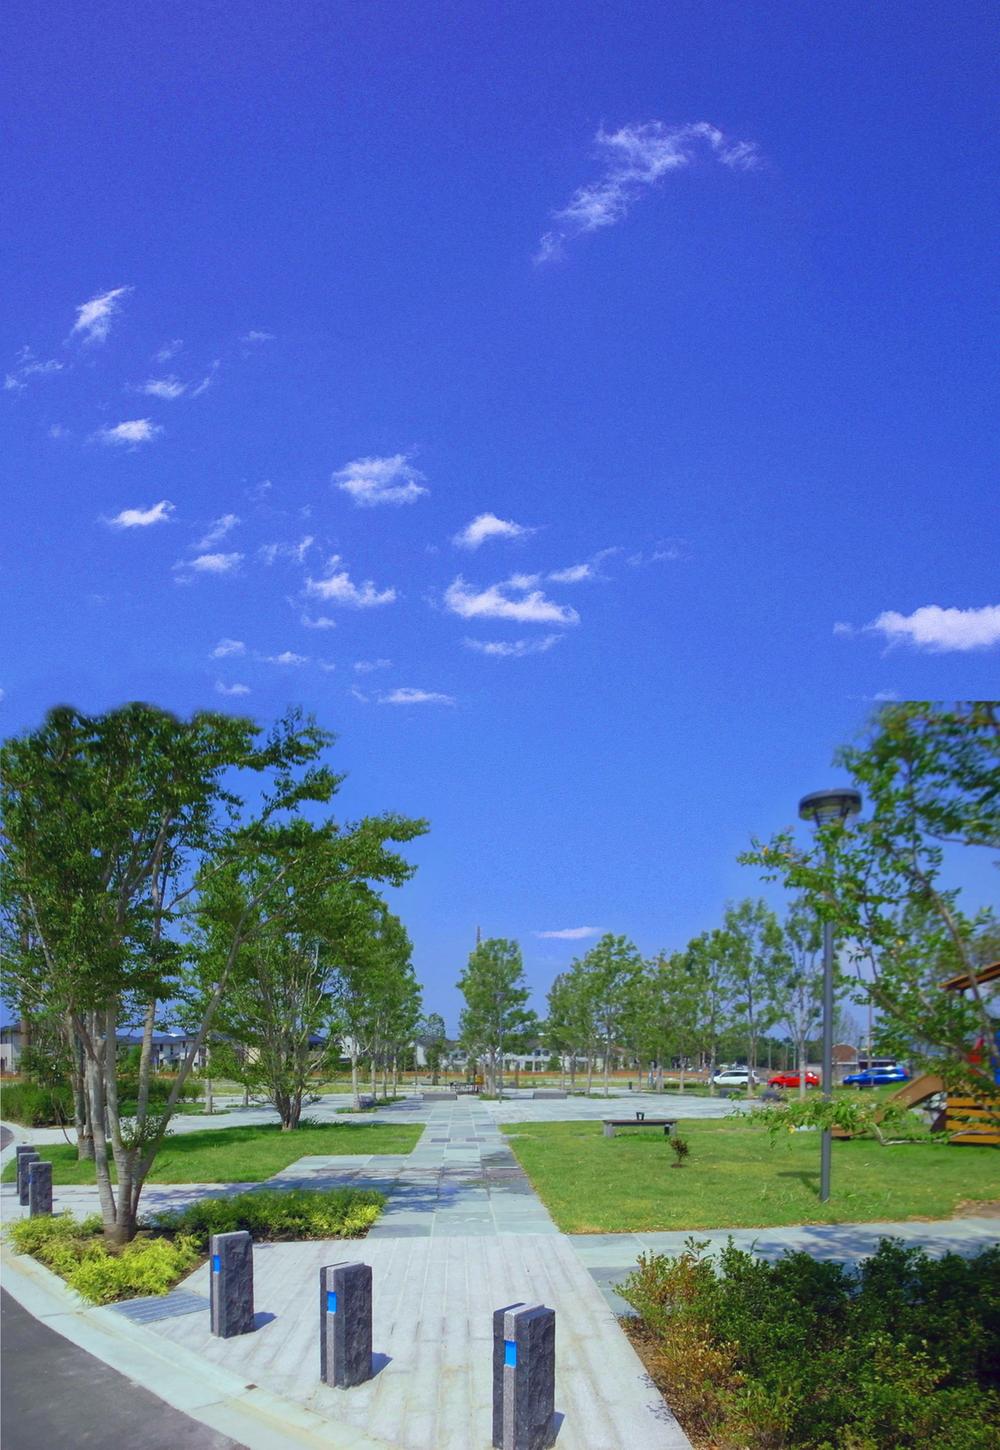 Other local. It established a new three park, Together with the existing ones, To park in the town is one nine. Nature close to enjoy the city of four seasons (Photo Fountain Park)